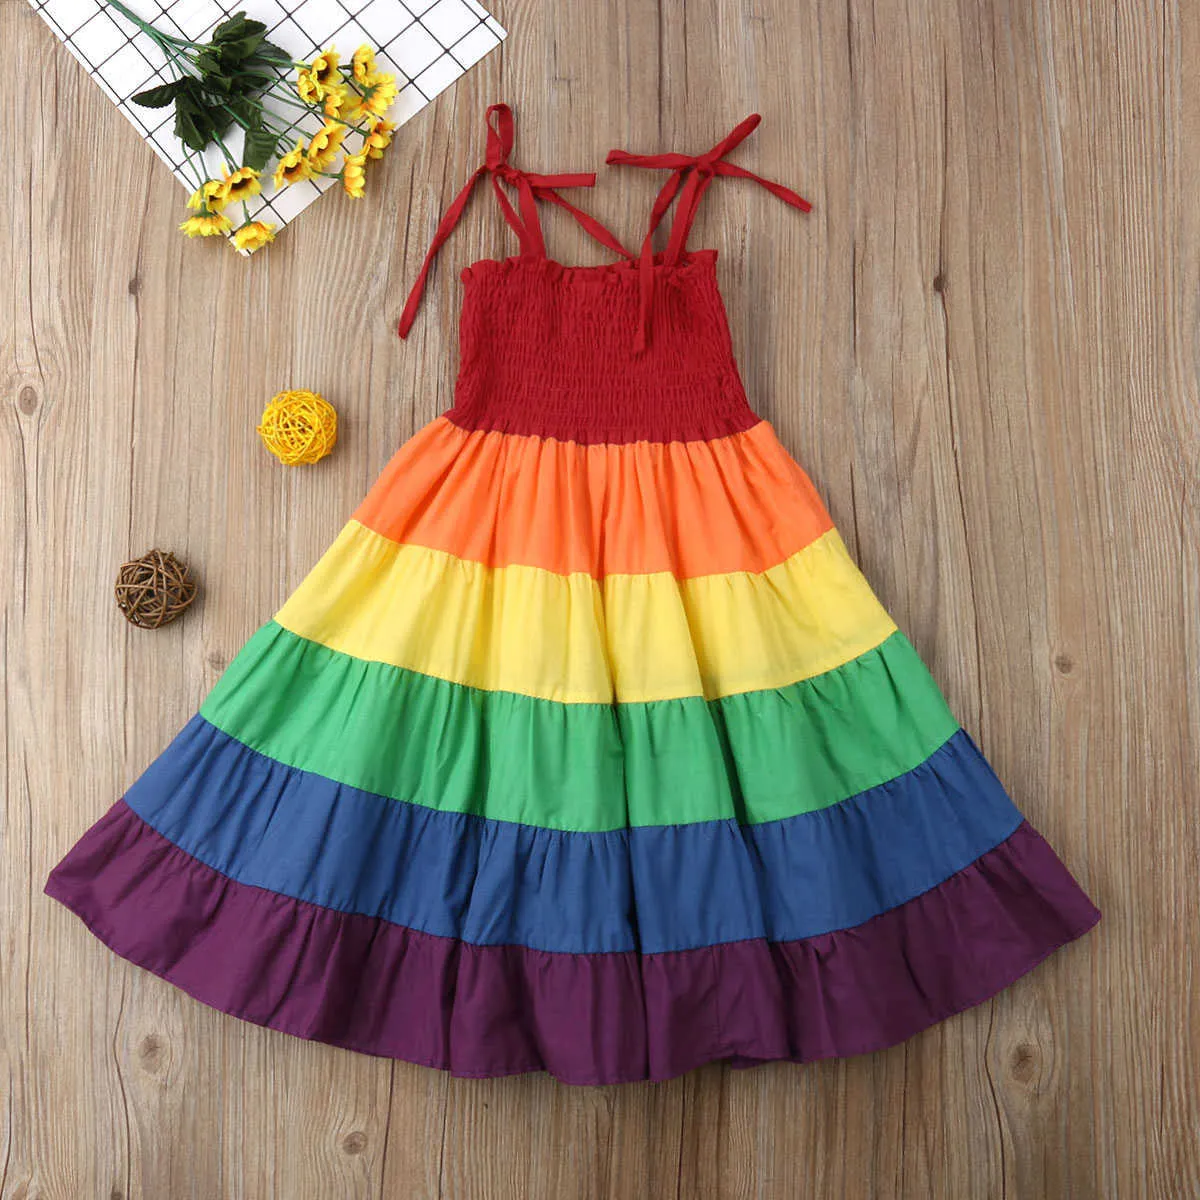 2019 Brand New Infant Kid Neonate Dress Colorful Rainbow Striped Print Ruffles A-Line Dress Sundress Summer Cute Outfit 2-7Y Q0716